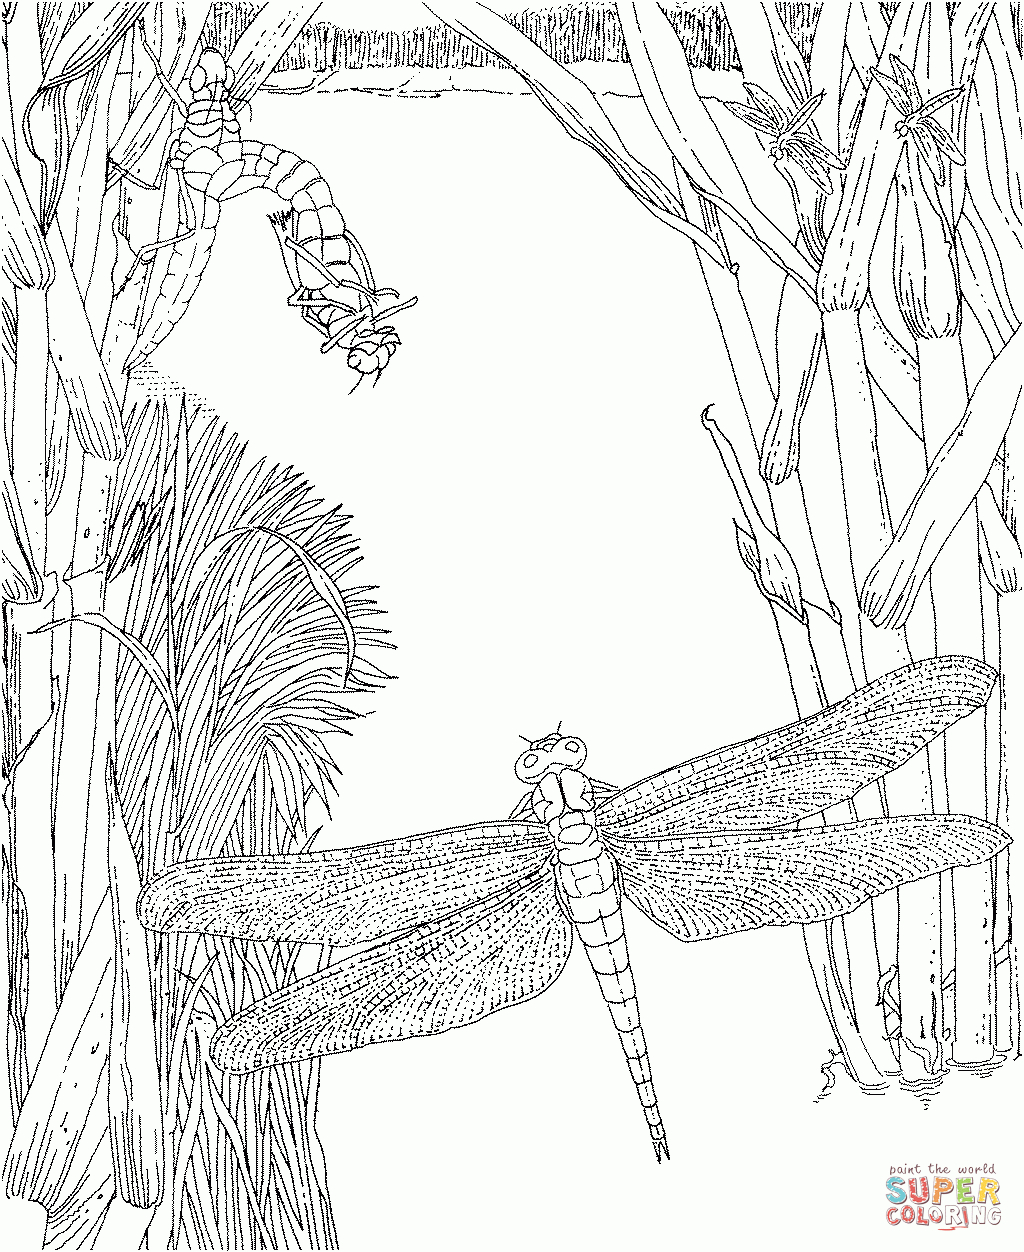 Dragonfly Coloring Pages | Free Coloring Pages - Free Printable Pictures Of Dragonflies